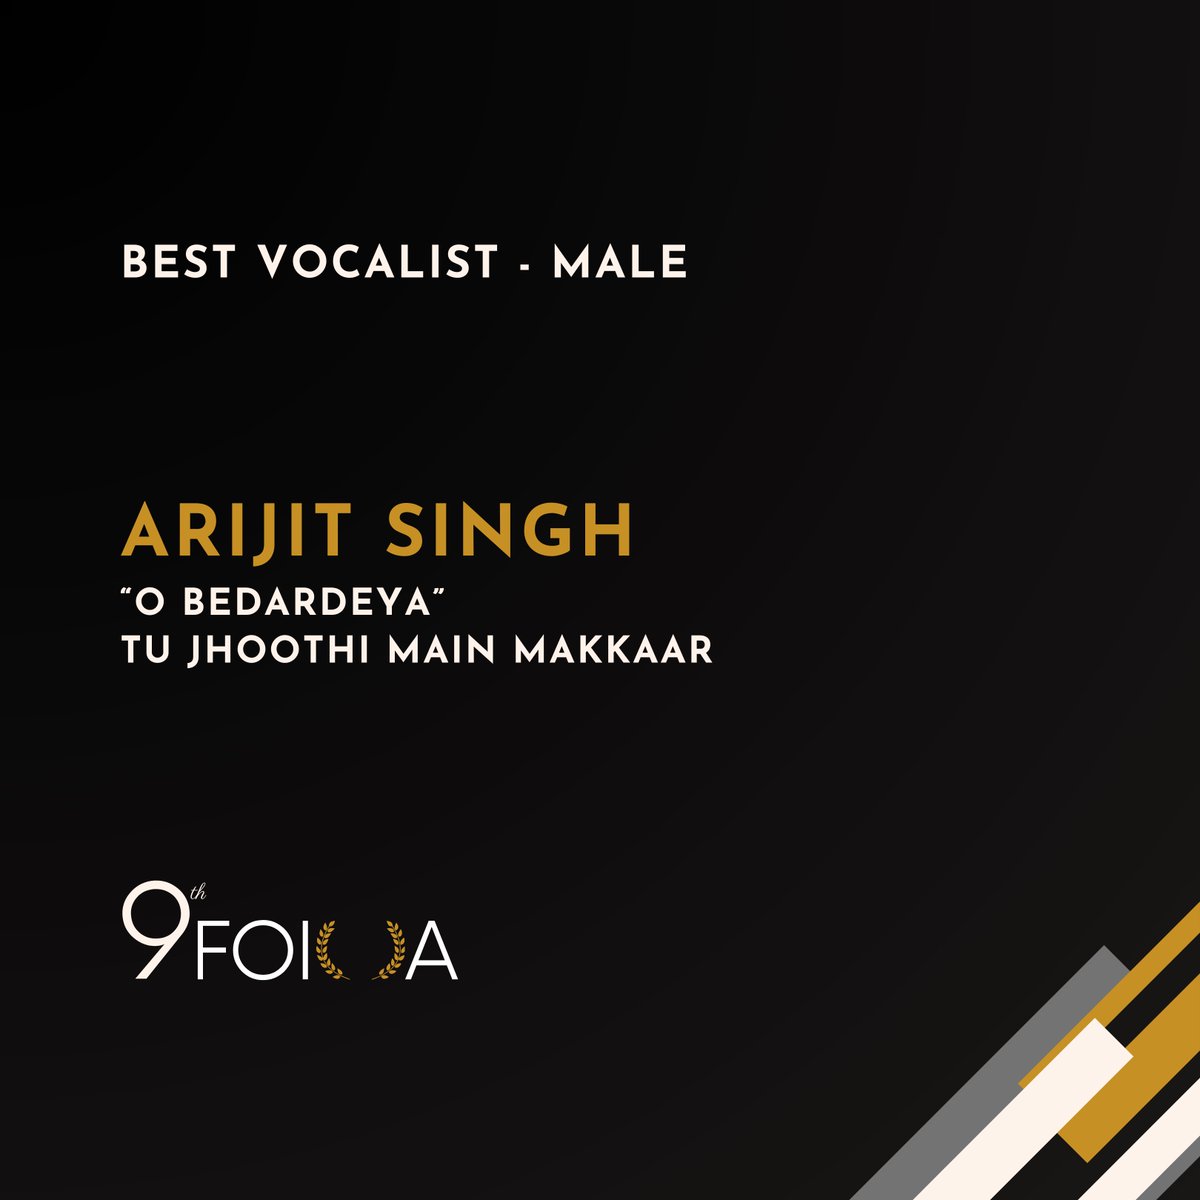 #9thFOIOA Best Vocalist – Male
Arijit Singh for the song “O Bedardeya” – Tu Jhoothi Main Makkaar
@arijitsingh

Also congratulations to  @ipritamofficial daa nd @OfficialAMITABH  thank you for creating this magic 😍😍